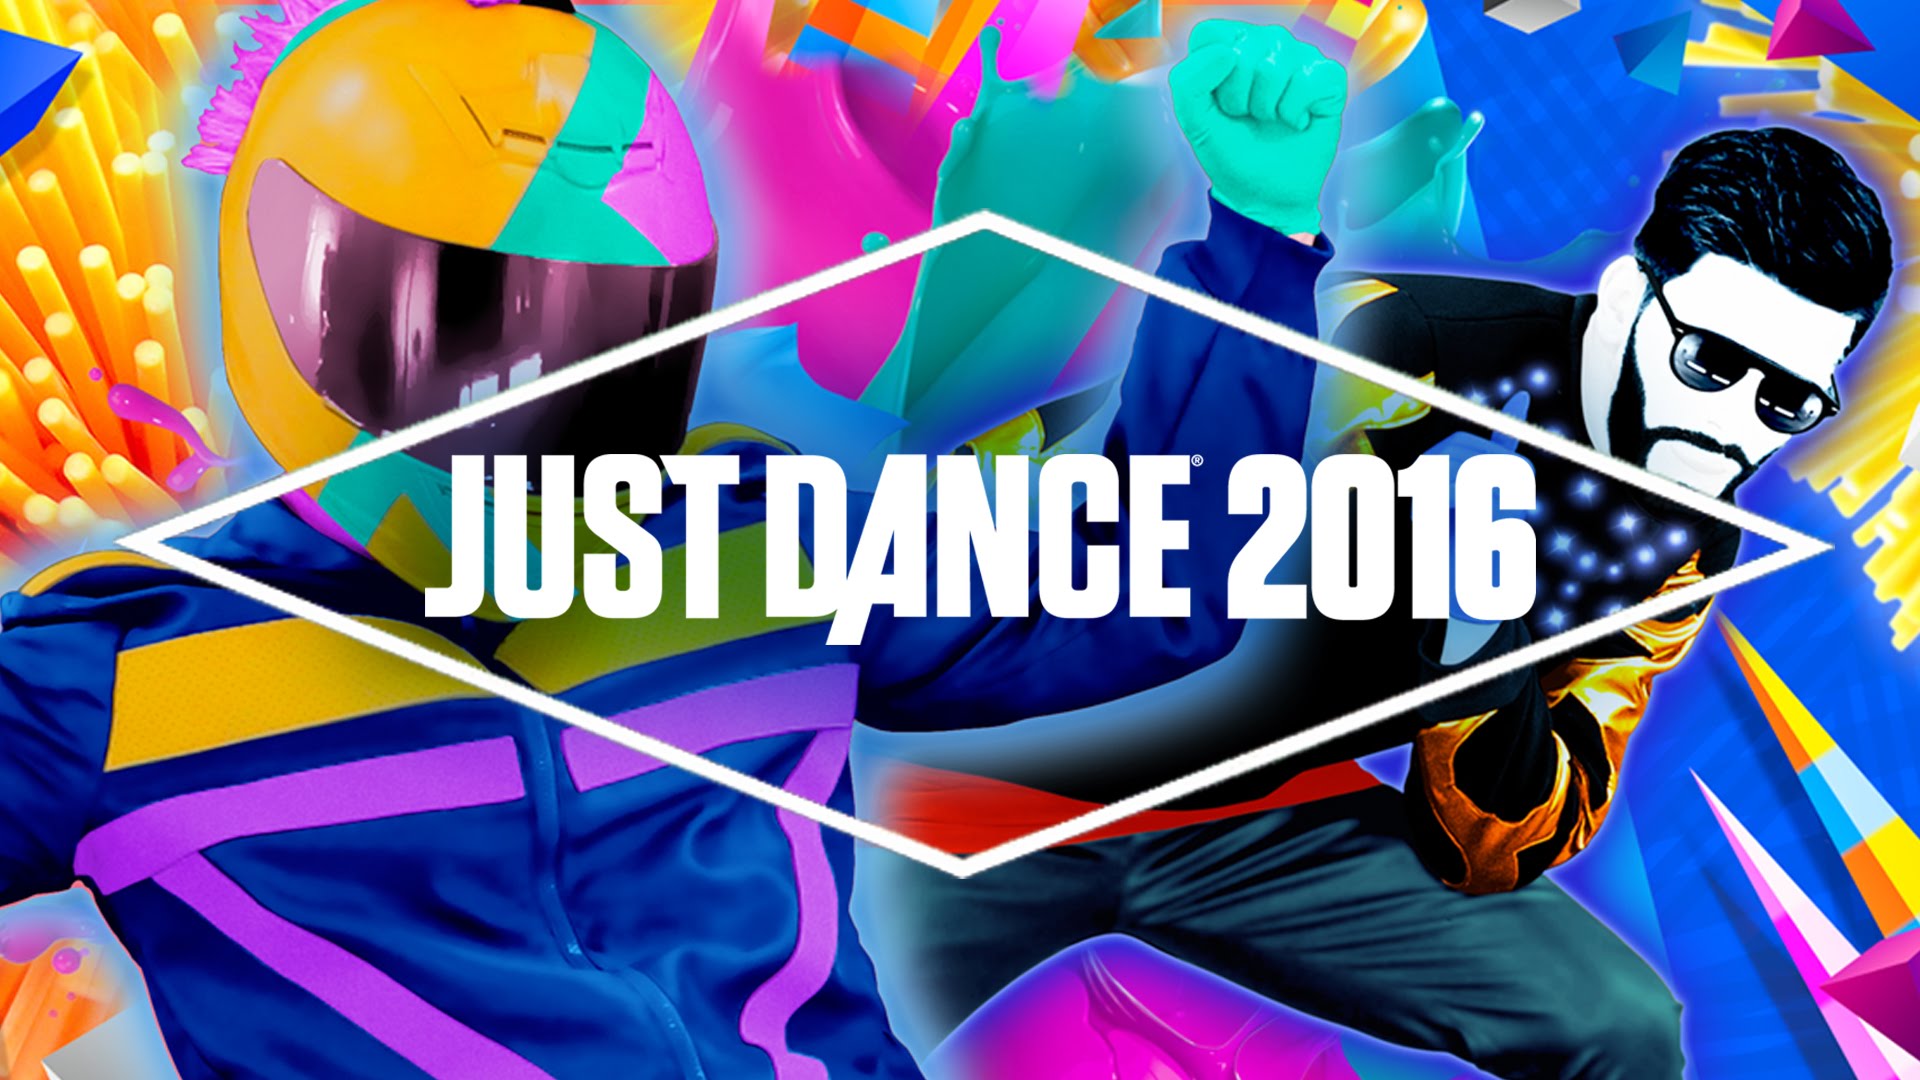 Just Dance 2016. Just Dance 2016 (Xbox one) обложка. Джаст дэнс НАУ. Just Dance 2016 (Xbox one) Скриншот. This is just a game